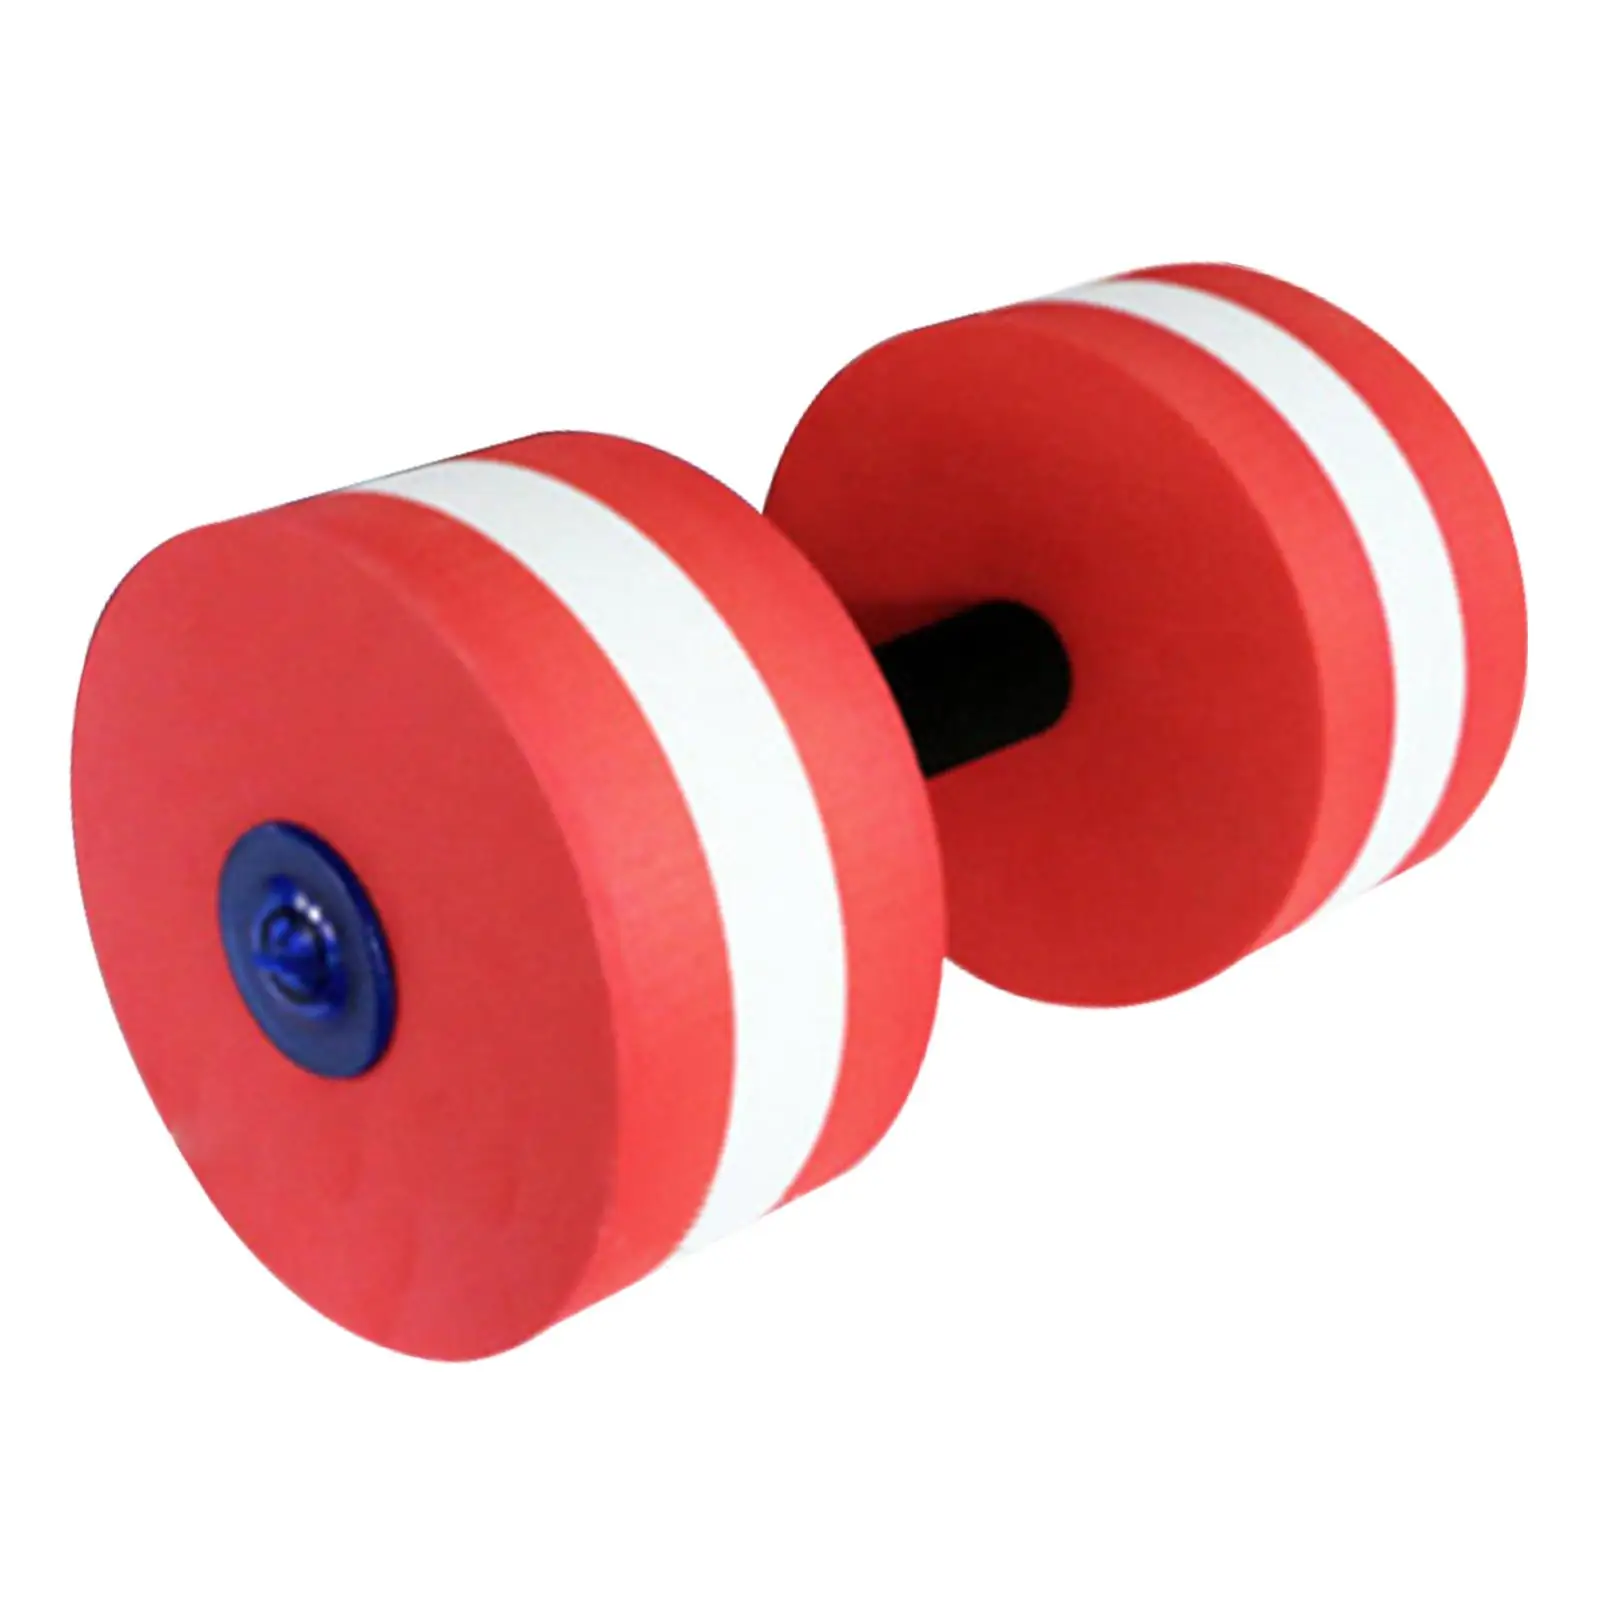 Aquatic Dumbbell Swimming Barbell Pool Resistance Water Dumbbell Men for Water Aerobics Workouts Pool Water Sports